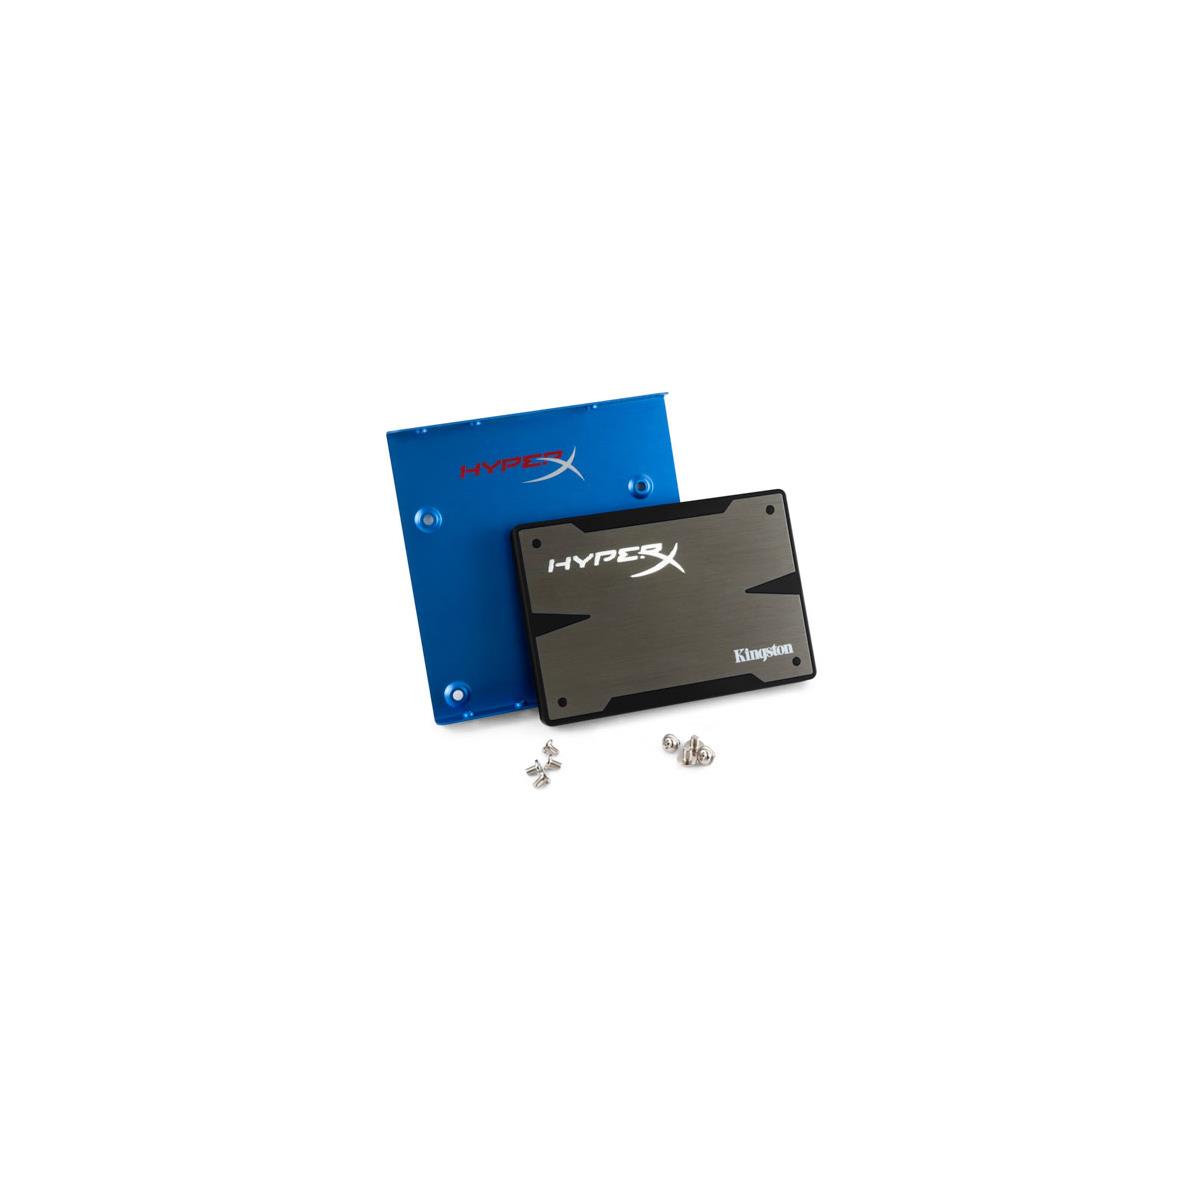 Image of Kingston Technology HyperX 3K 240GB Solid State Drive